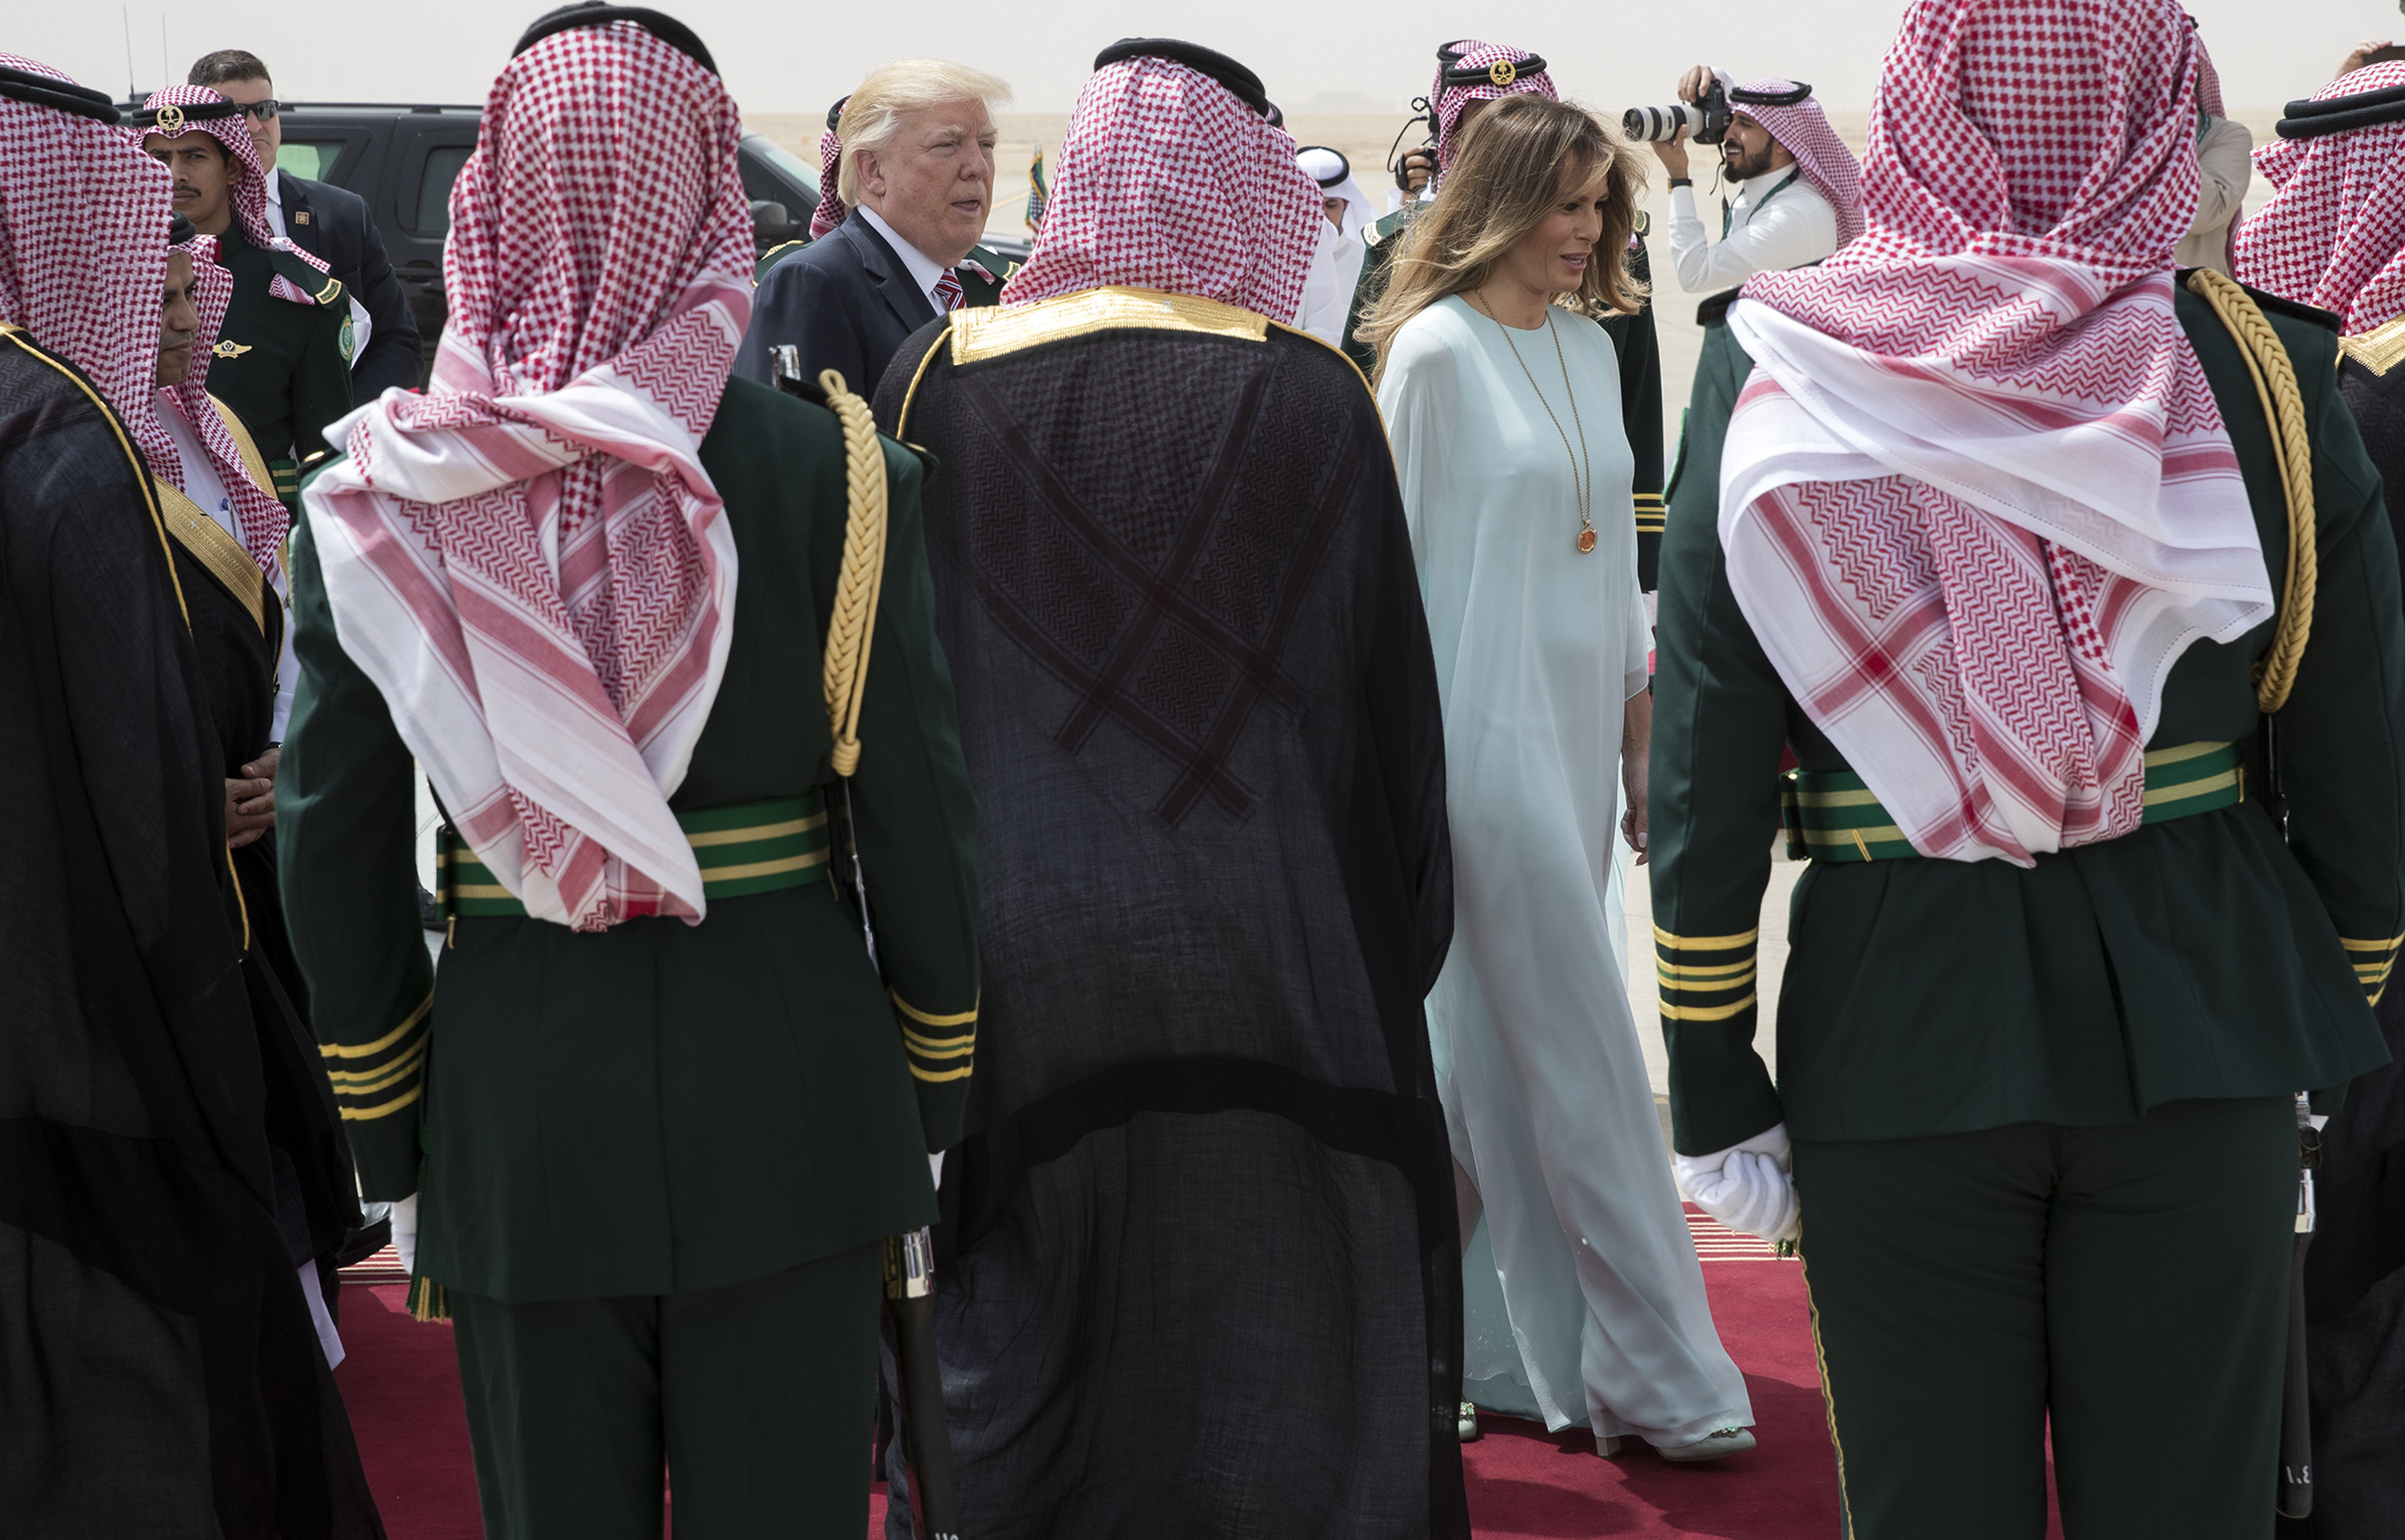 President Donald Trump and first lady Melania Trump wearing powder blue gown prepares to board Air Force One to depart for Israel from King Khalid International Airport in Riyadh, Saudi Arabia, May 22, 2017.